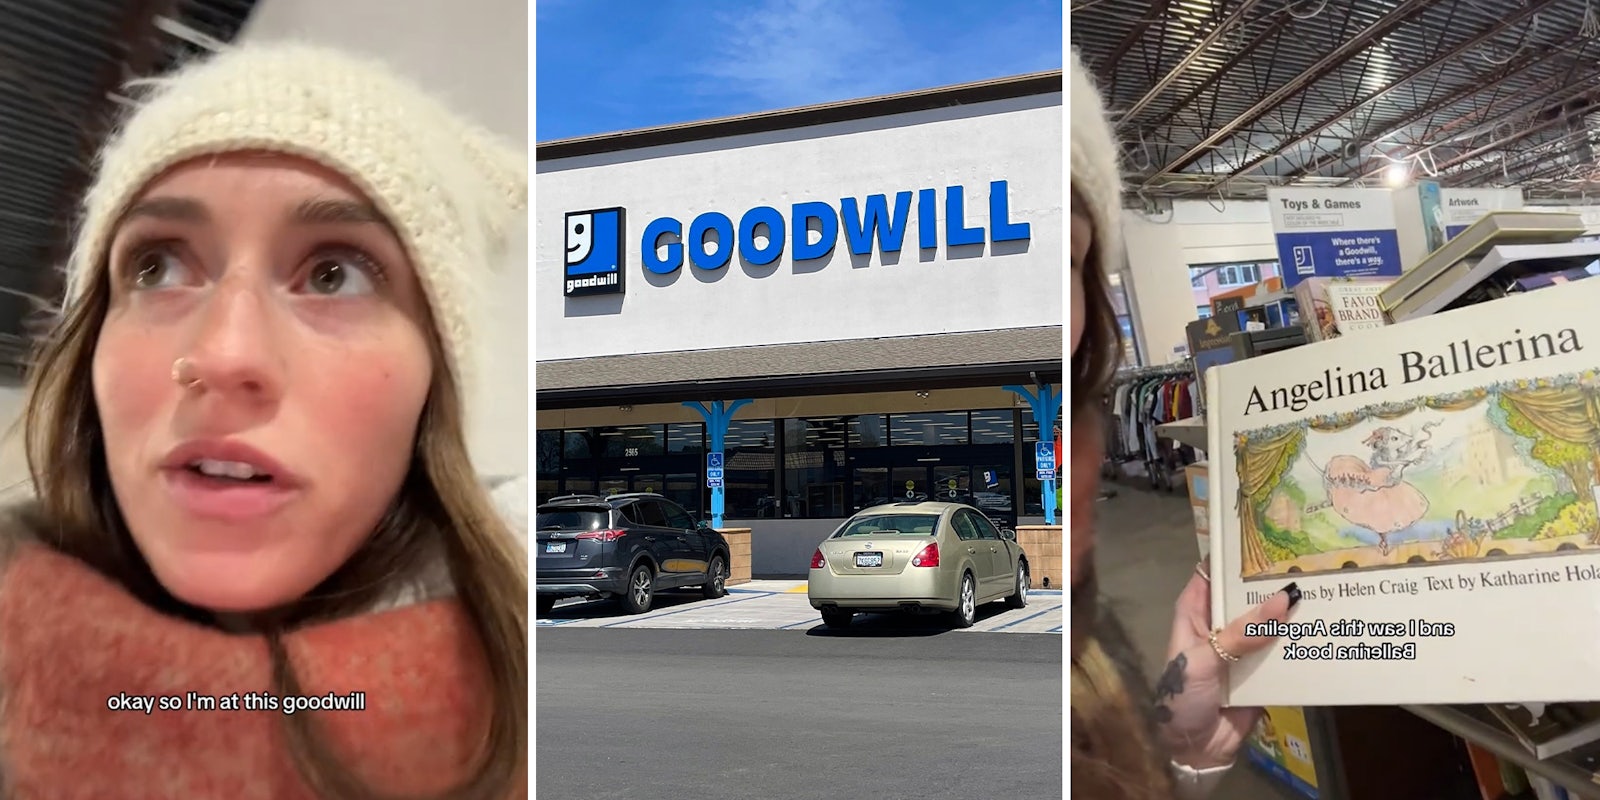 Woman comes across book at Goodwill.